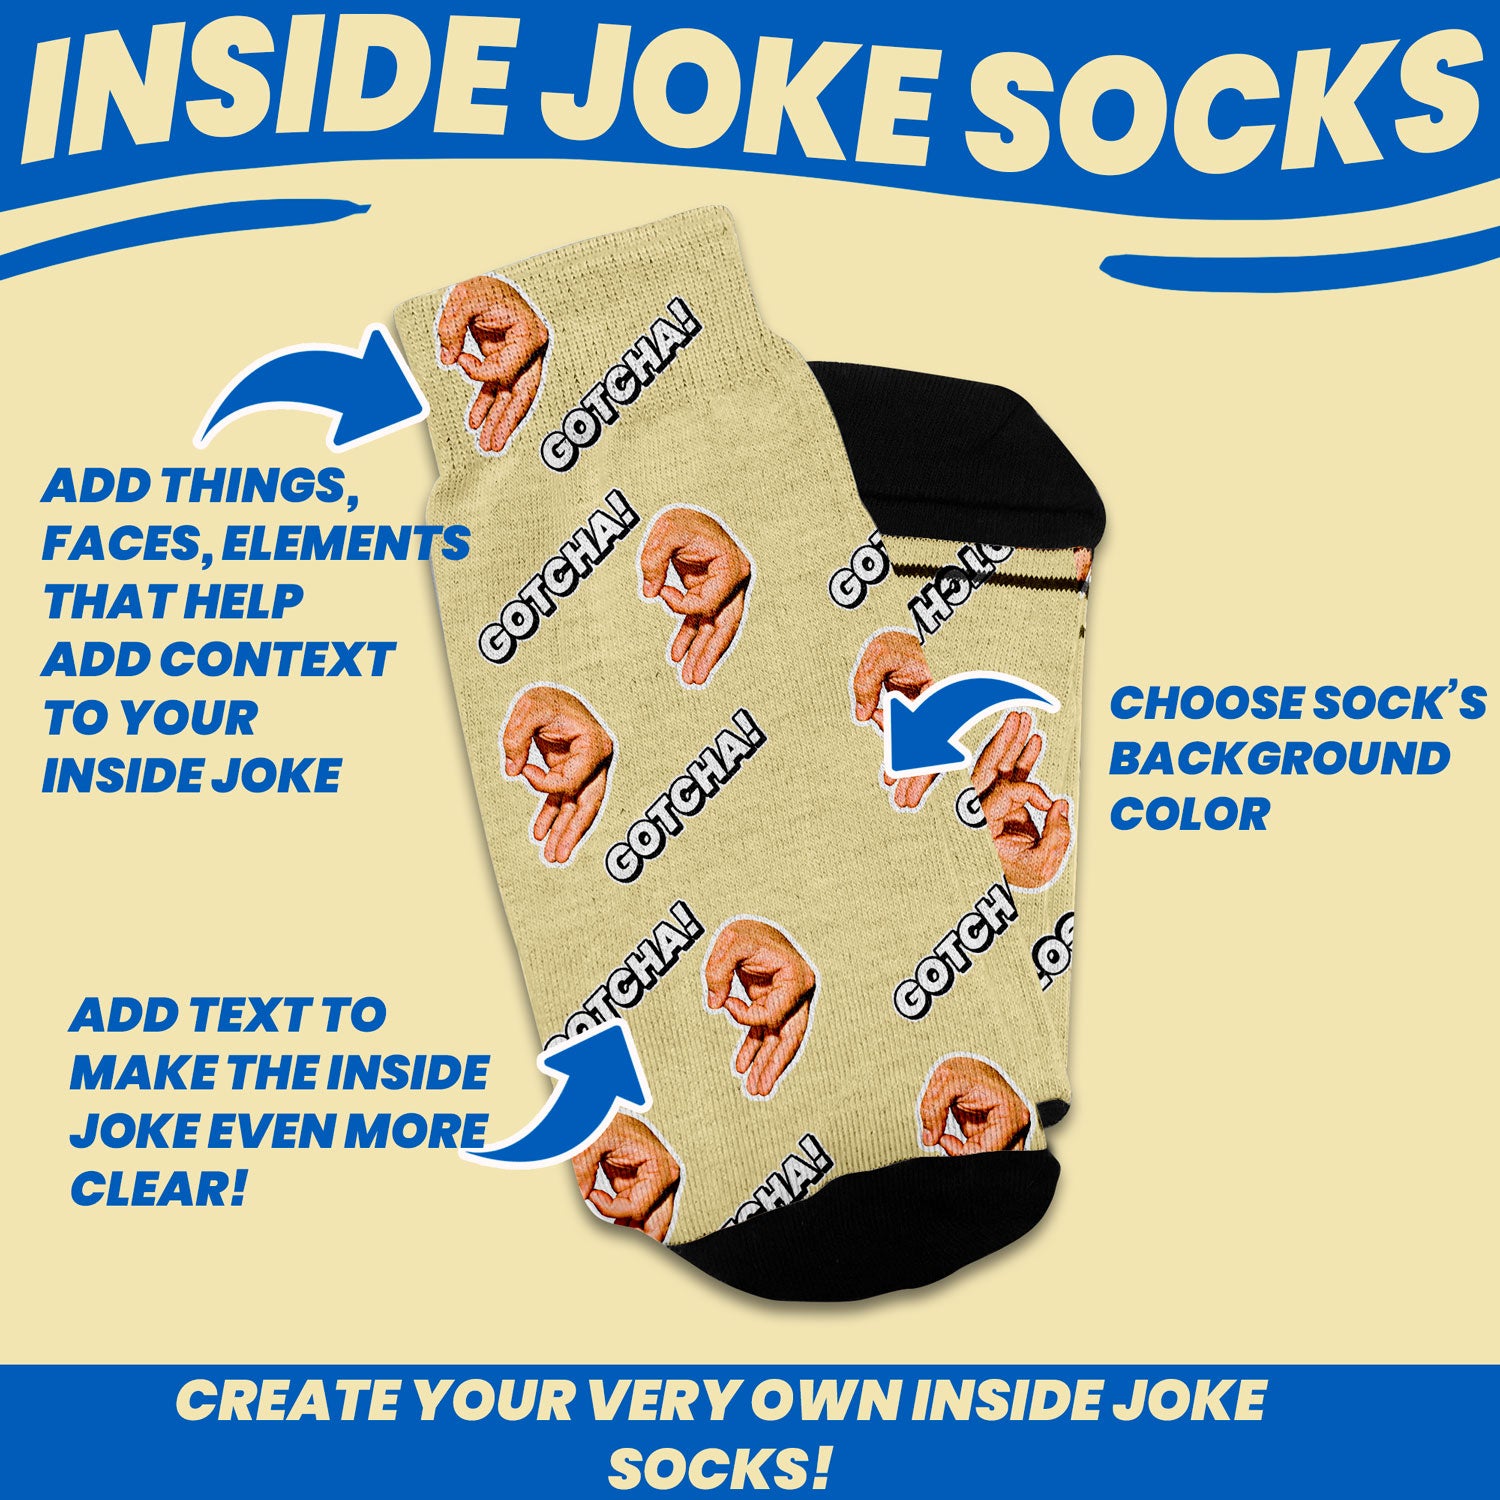 inside joke gift socks personalized with objects and text customization features such as amount of inside joke objects to add, text customization and sock color